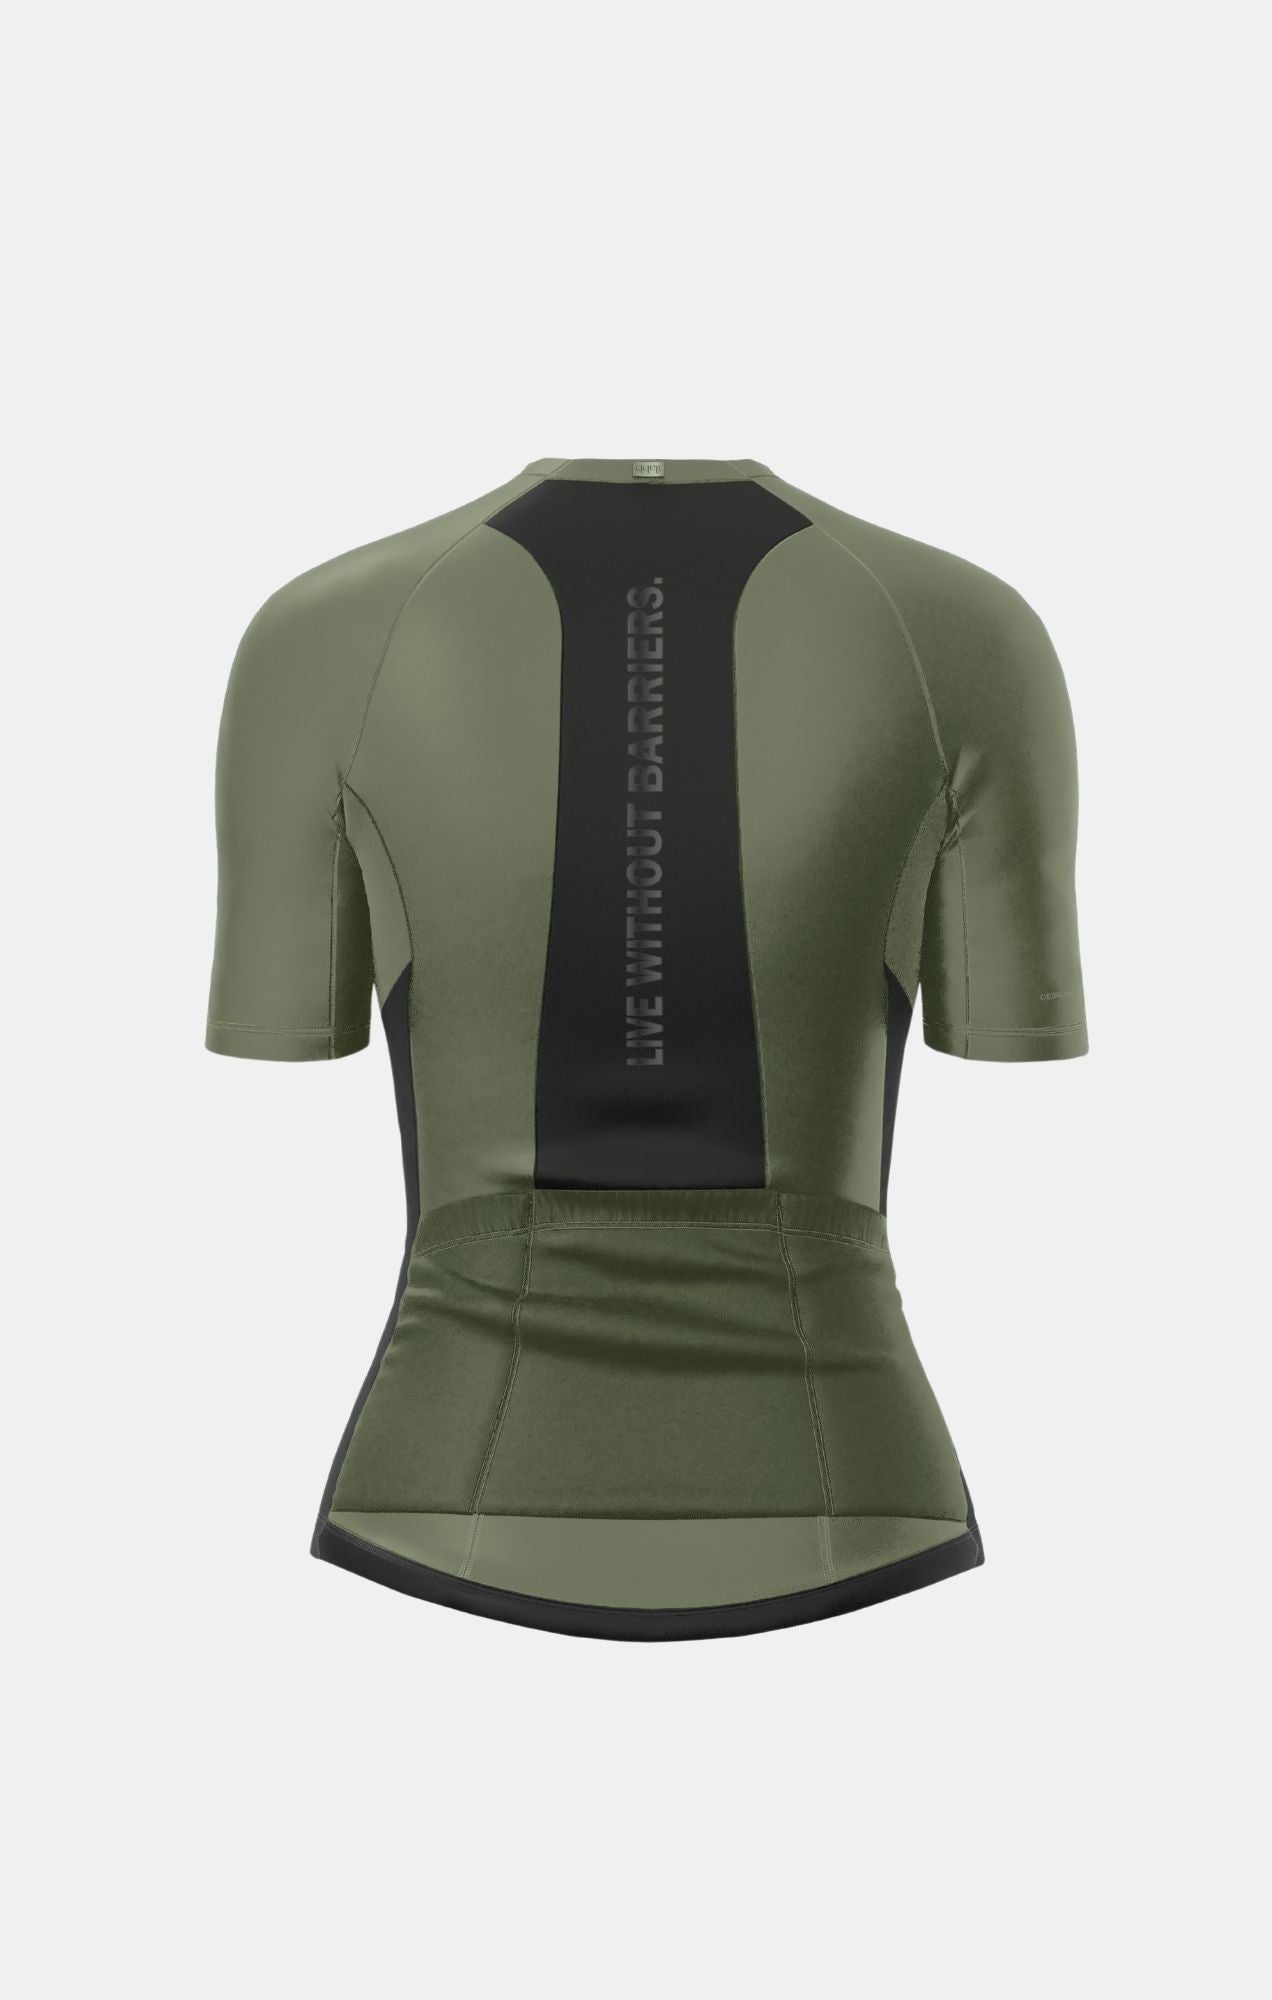 Women's Detour Fitted Top - Army Green - ilabb